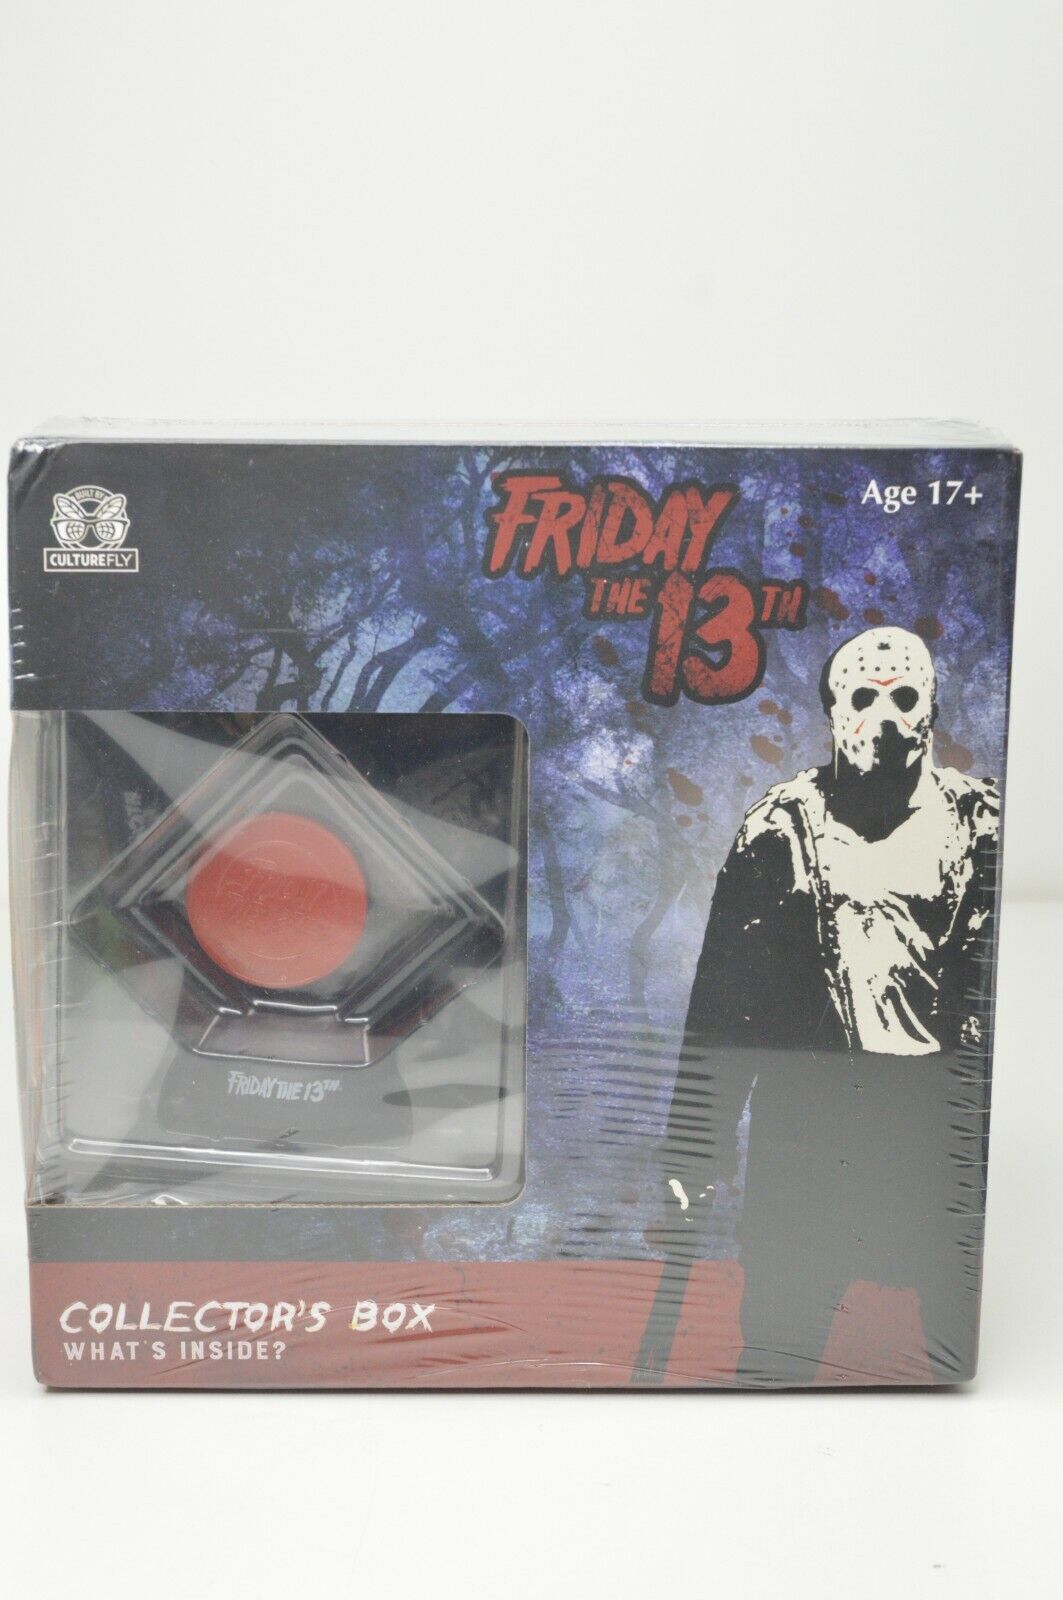 Horror Friday The 13th CultureFly Collector's Box Ages 17+ Brings 5 Items New